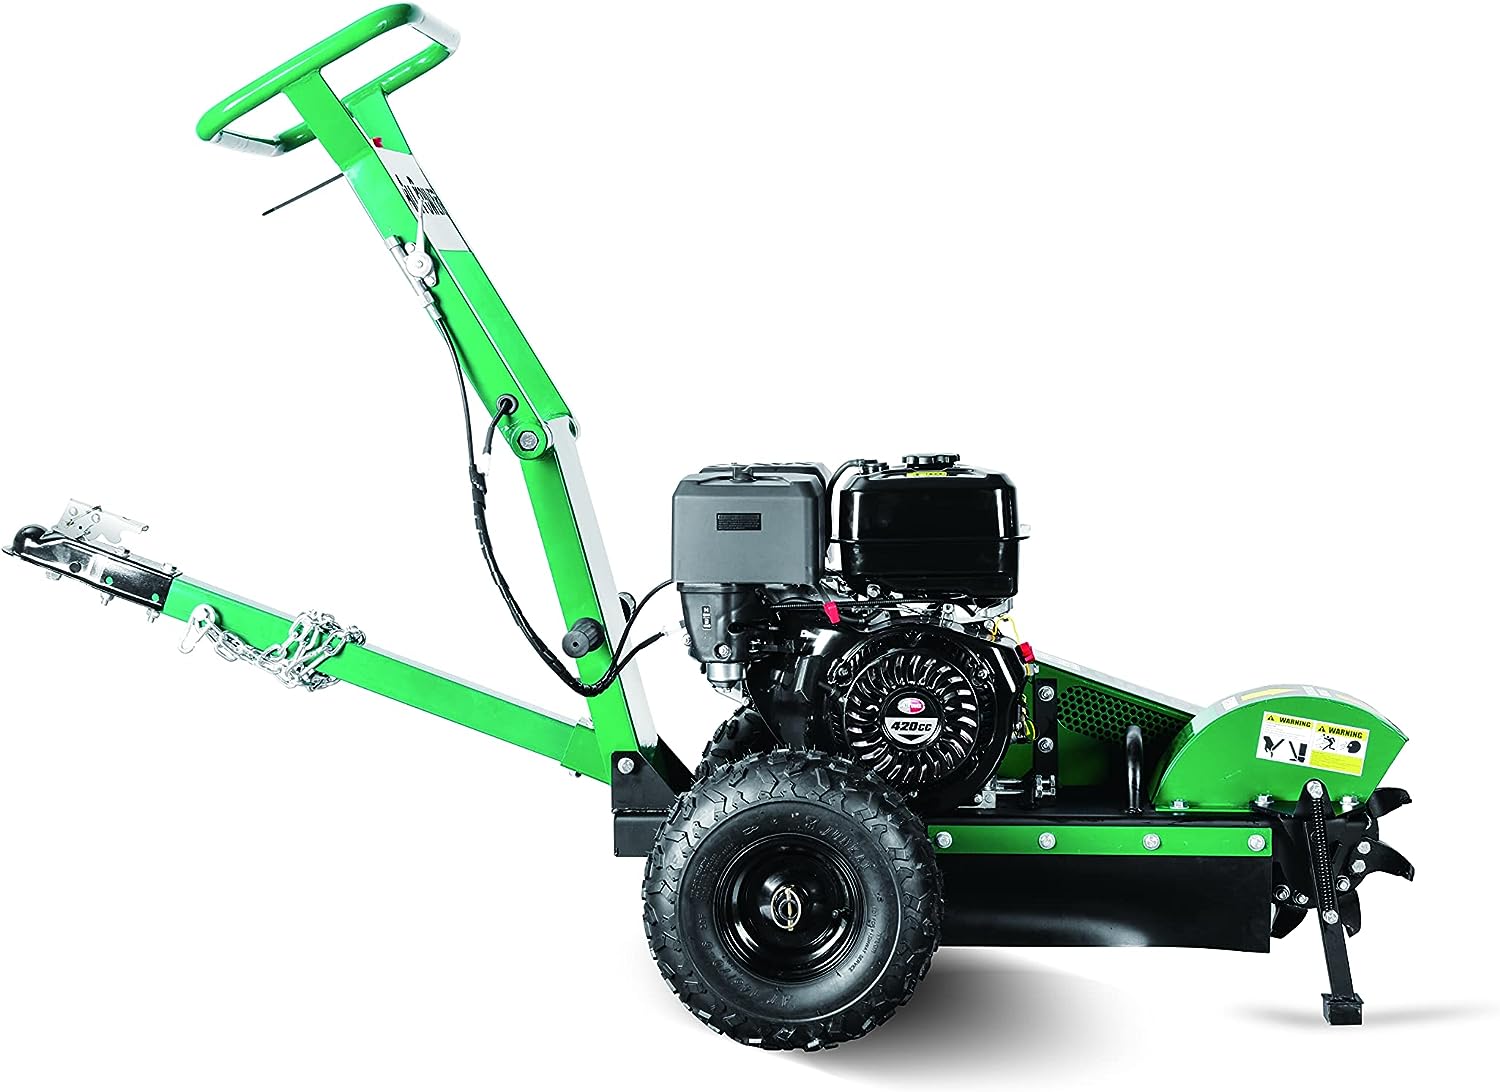 All Power, Stump Grinder for Tree Stump Removal with 12" Blades - $1,150